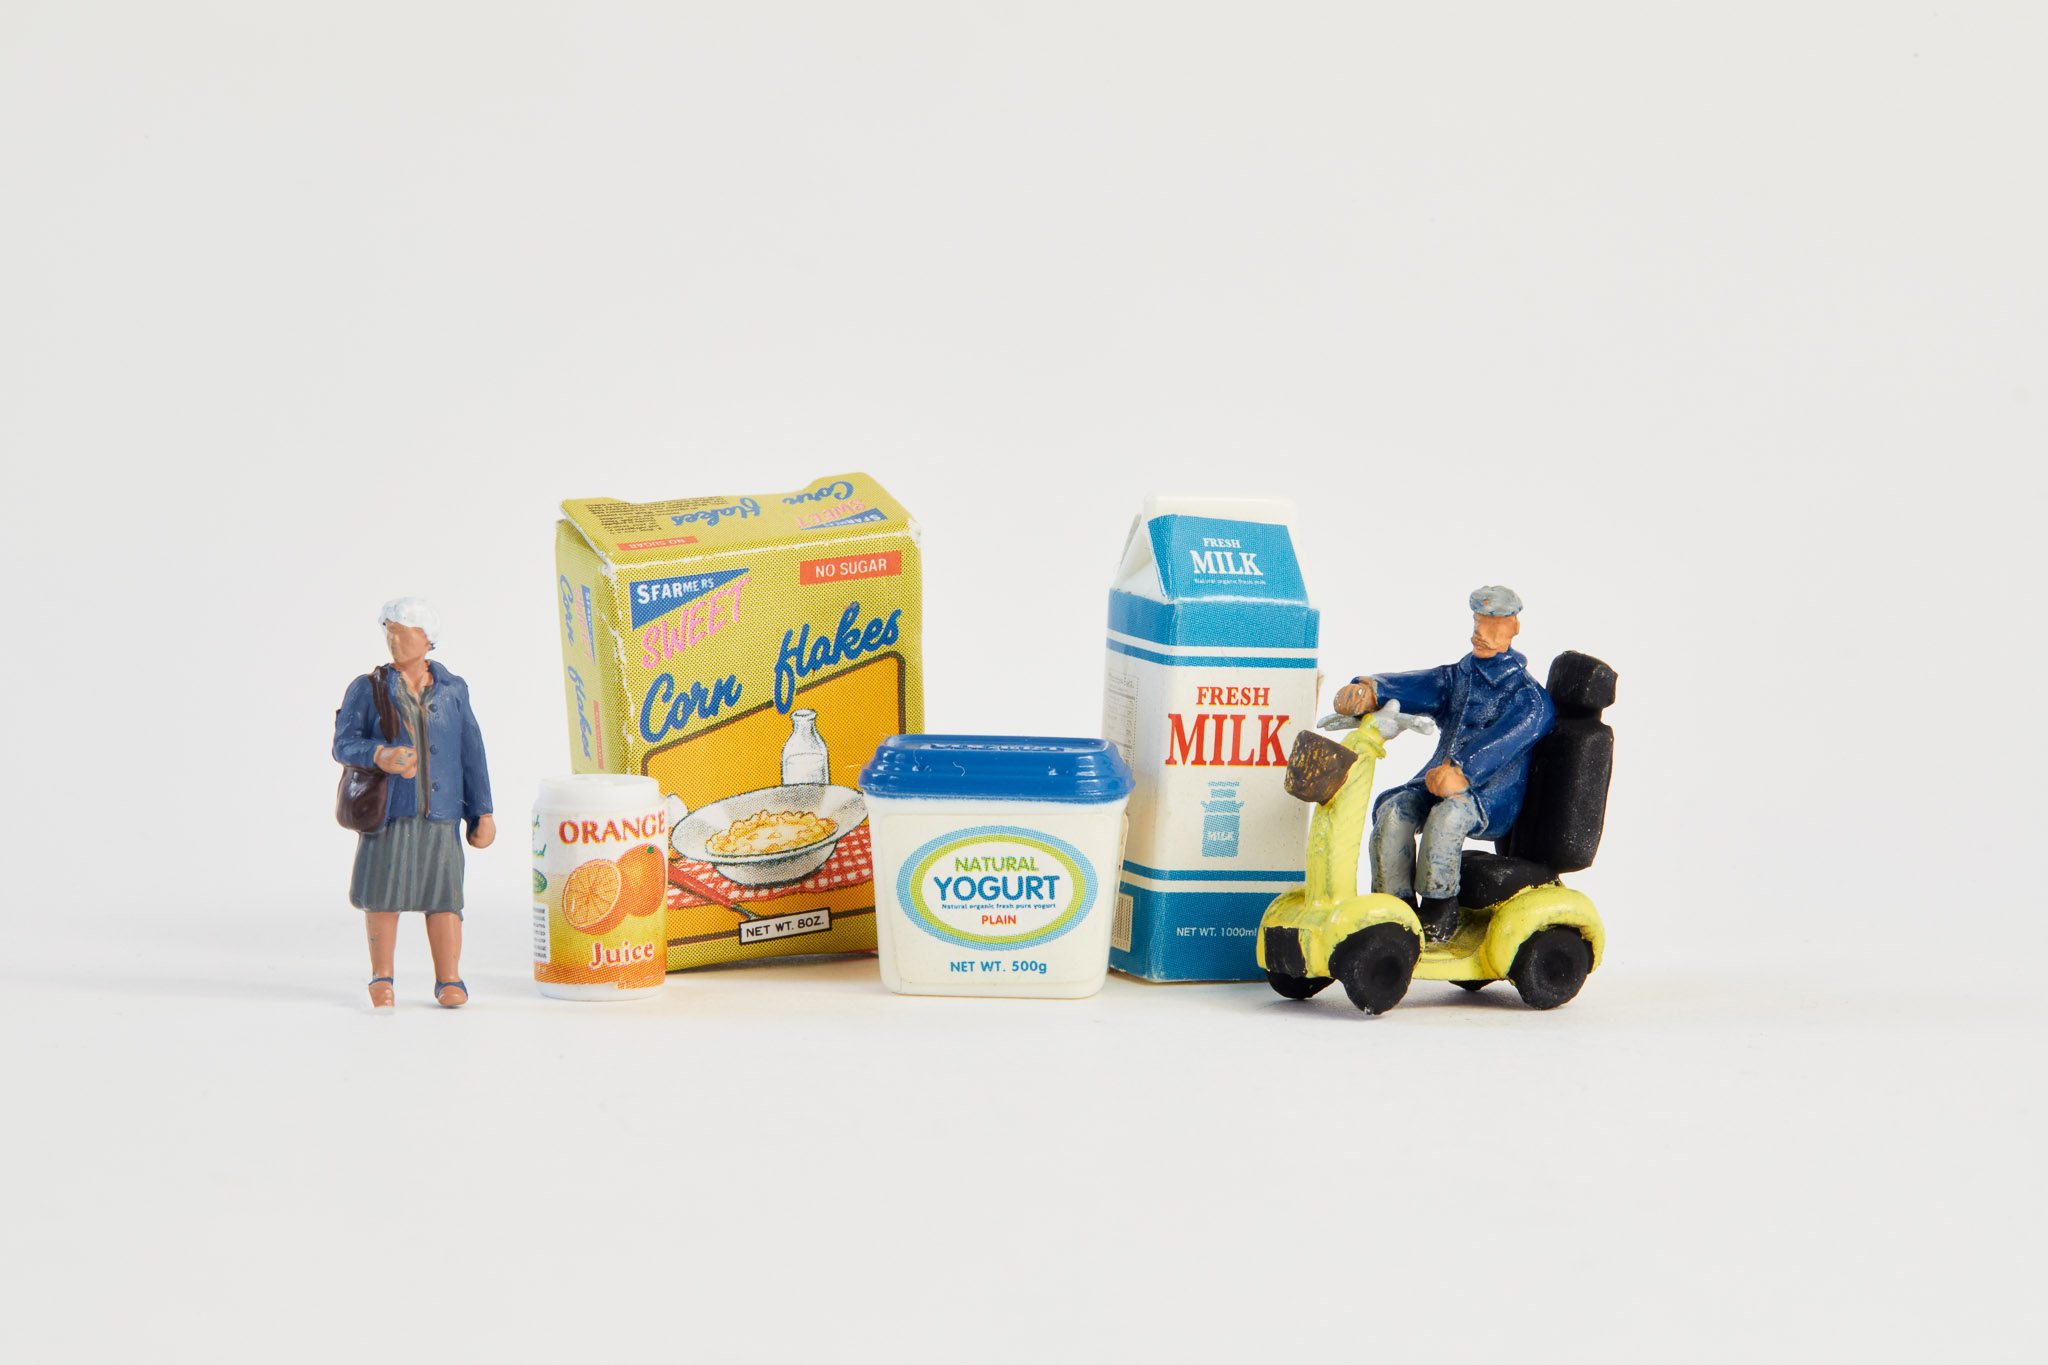 Pensioners and food items